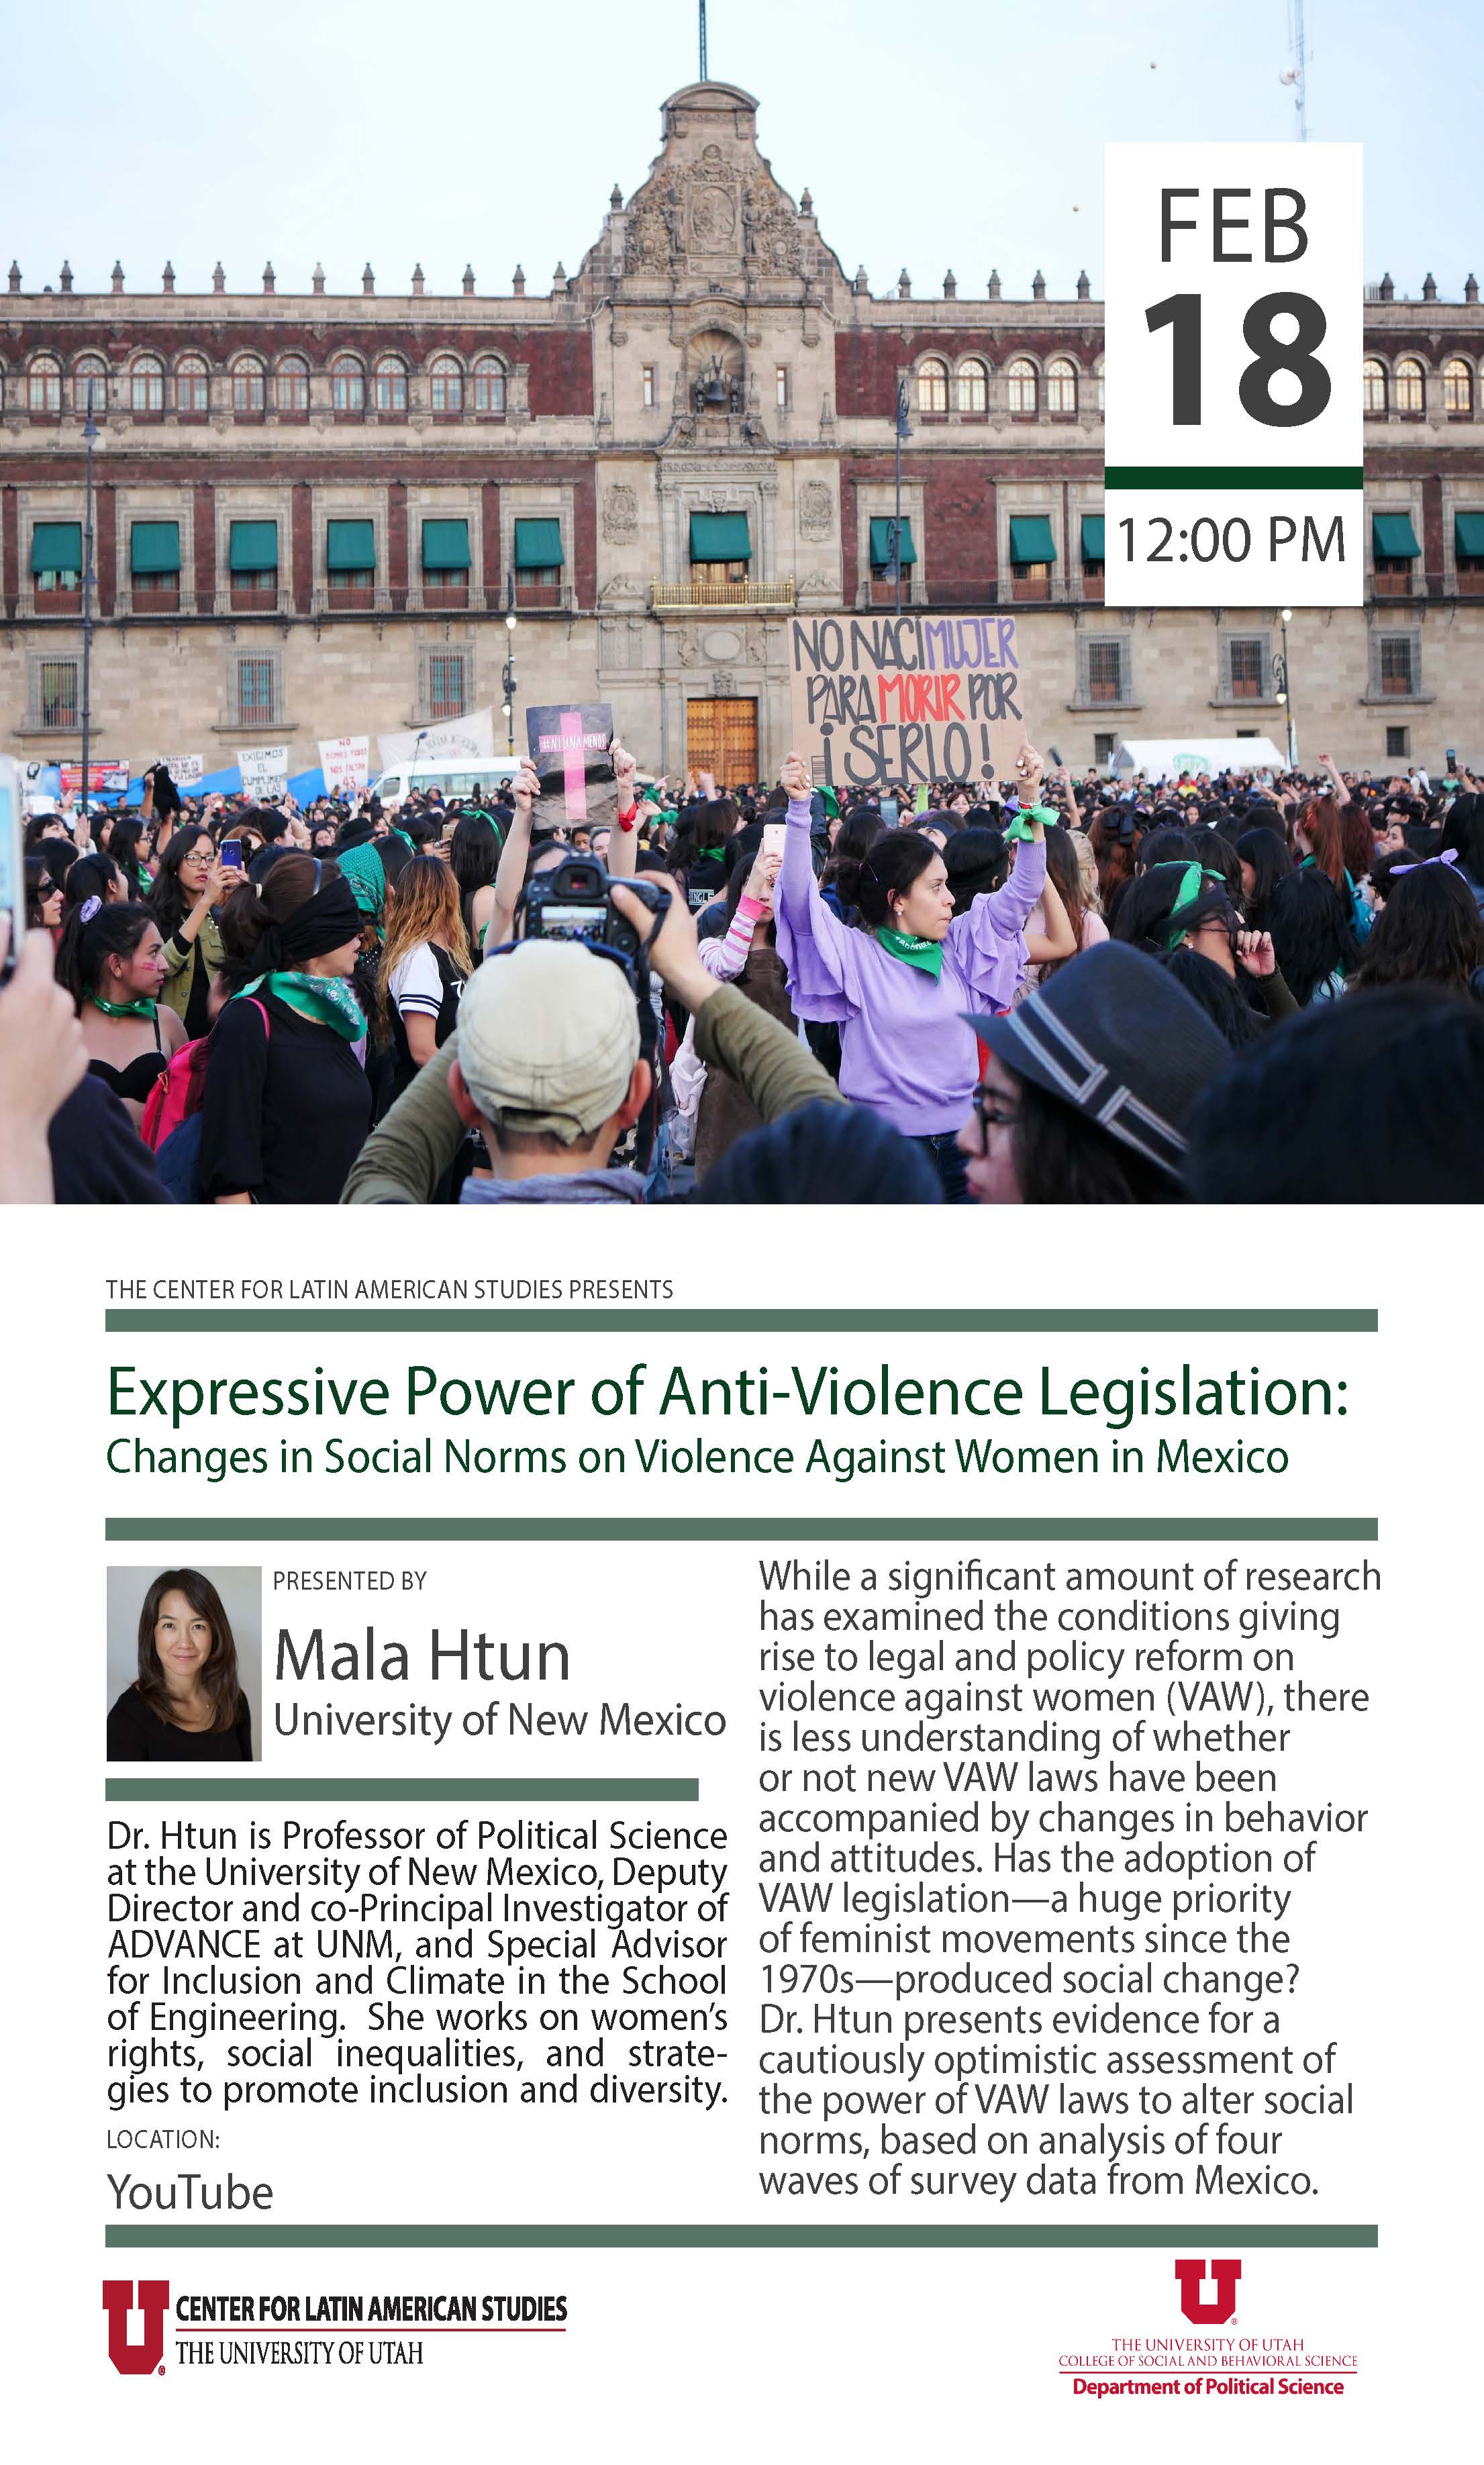 Expressive Power of Anti-Violence Legislation: Changes in Social Norms on Violence Against Women in Mexico